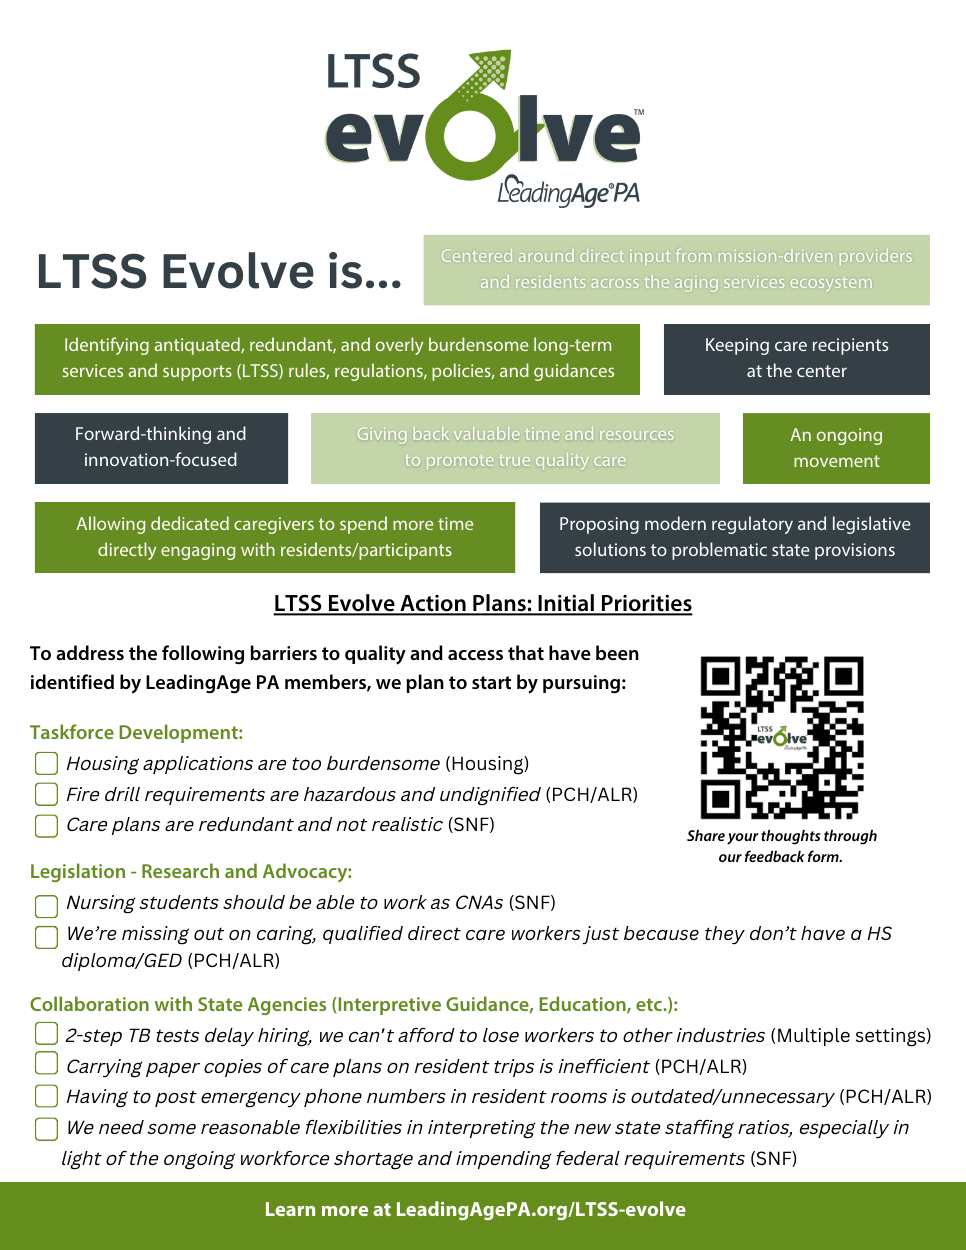 LTSS Evolve Plans: Priorities for long-term care regulations and policy